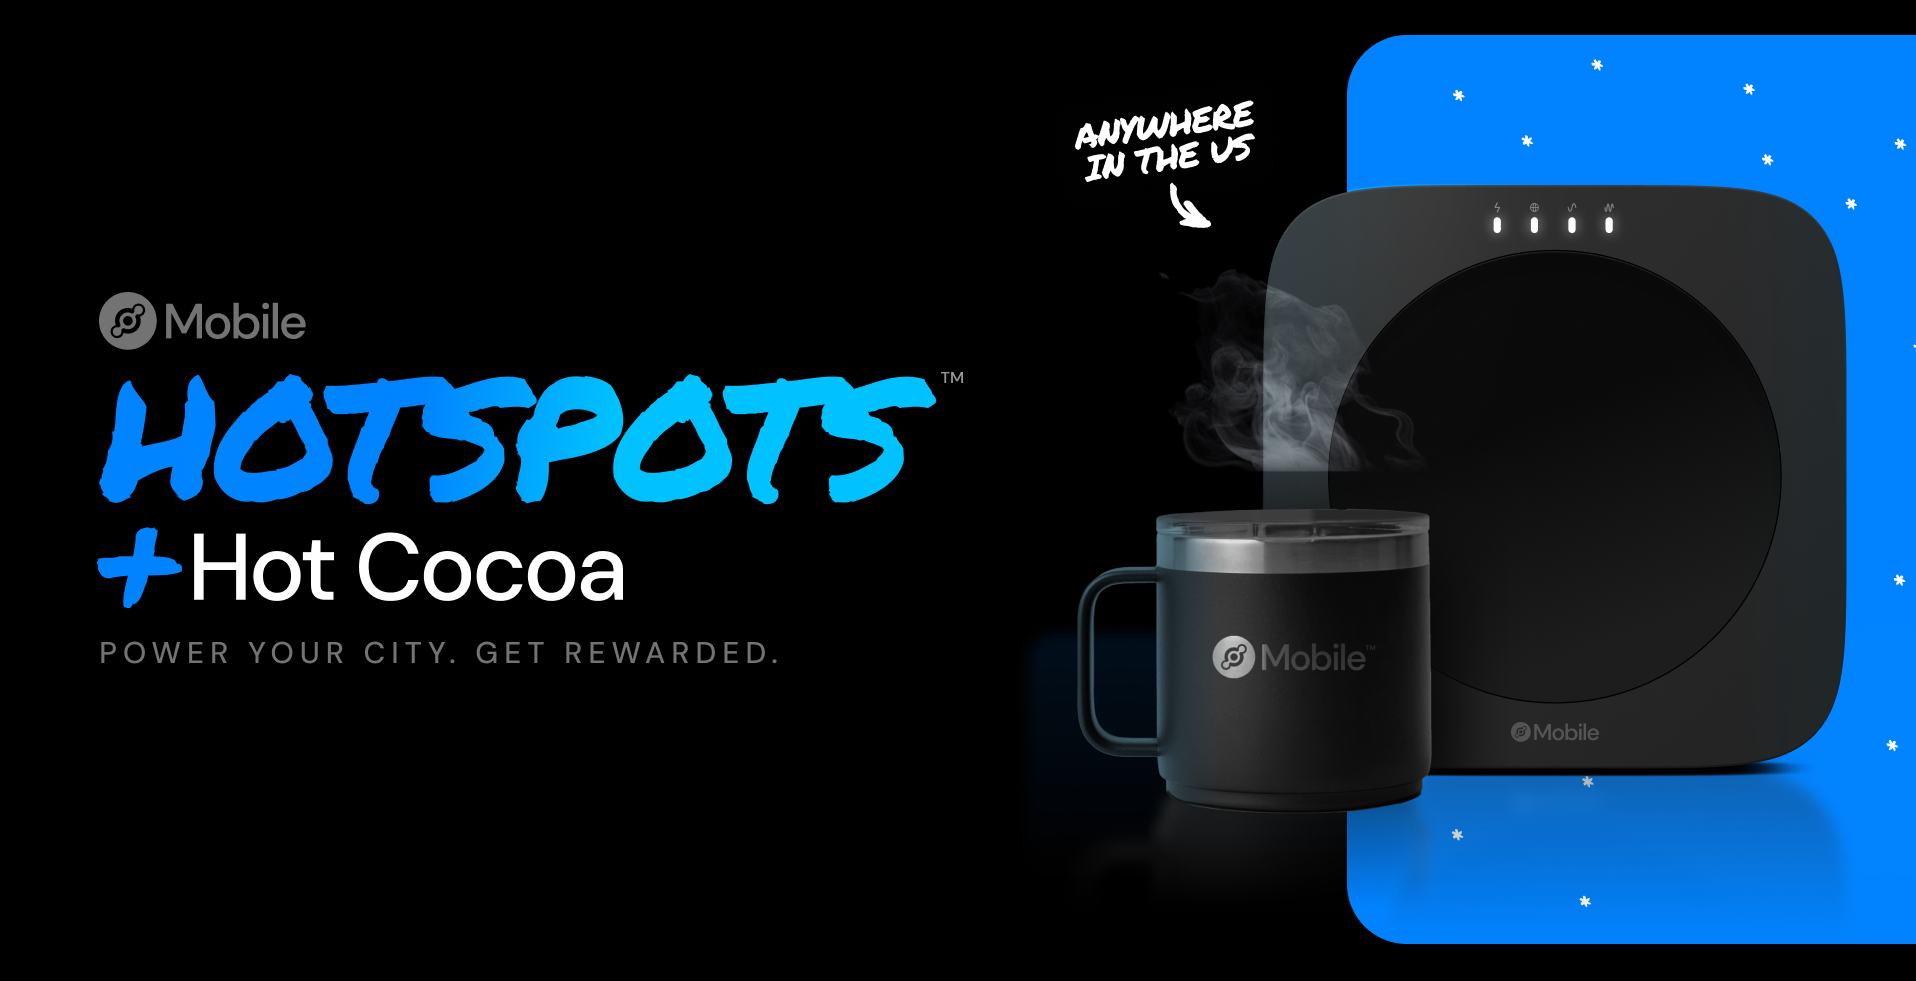 Stay Warm this Winter with Hotspots + Hot Cocoa ☃️